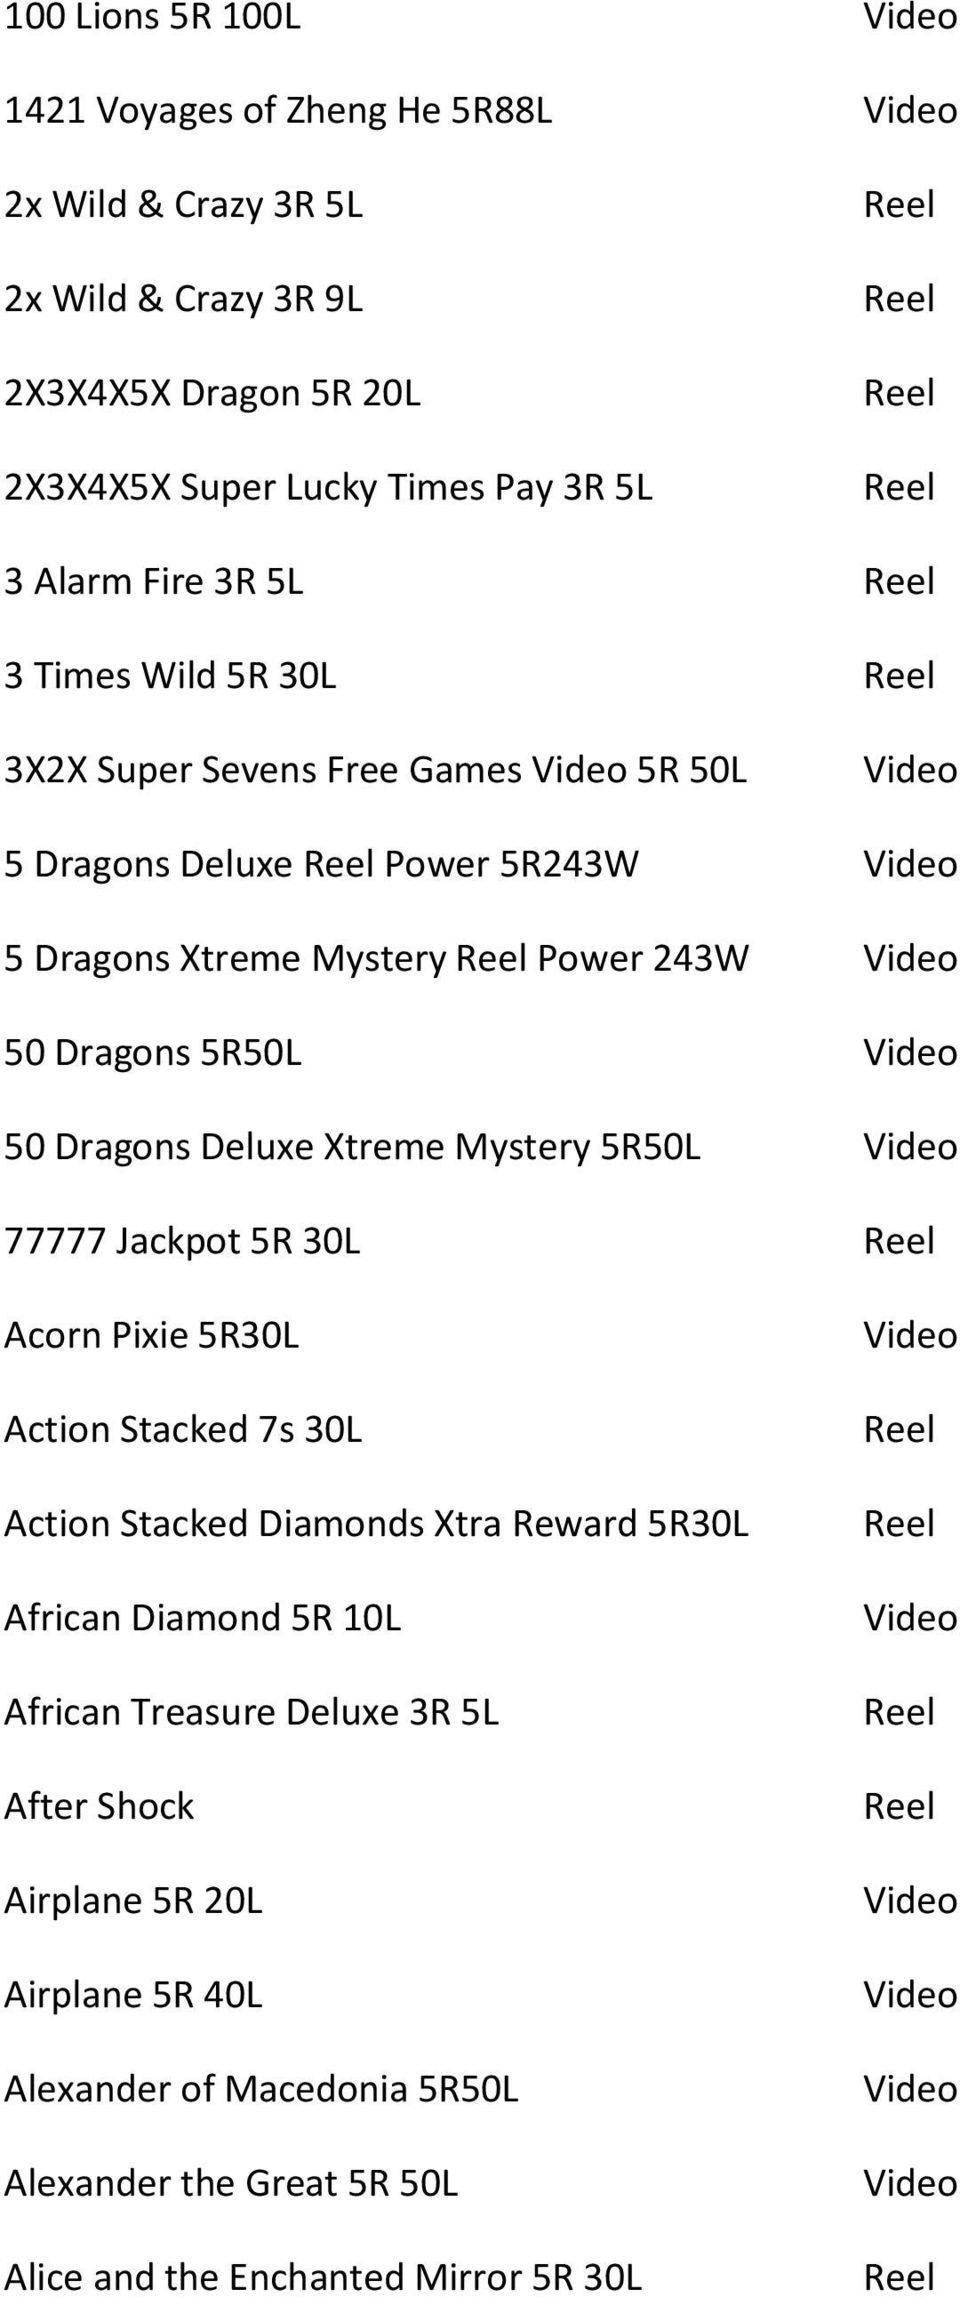 Deluxe Xtreme Mystery 5R50L 77777 Jackpot 5R 30L Acorn Pixie 5R30L Action Stacked 7s 30L Action Stacked Diamonds Xtra Reward 5R30L African Diamond 5R 10L